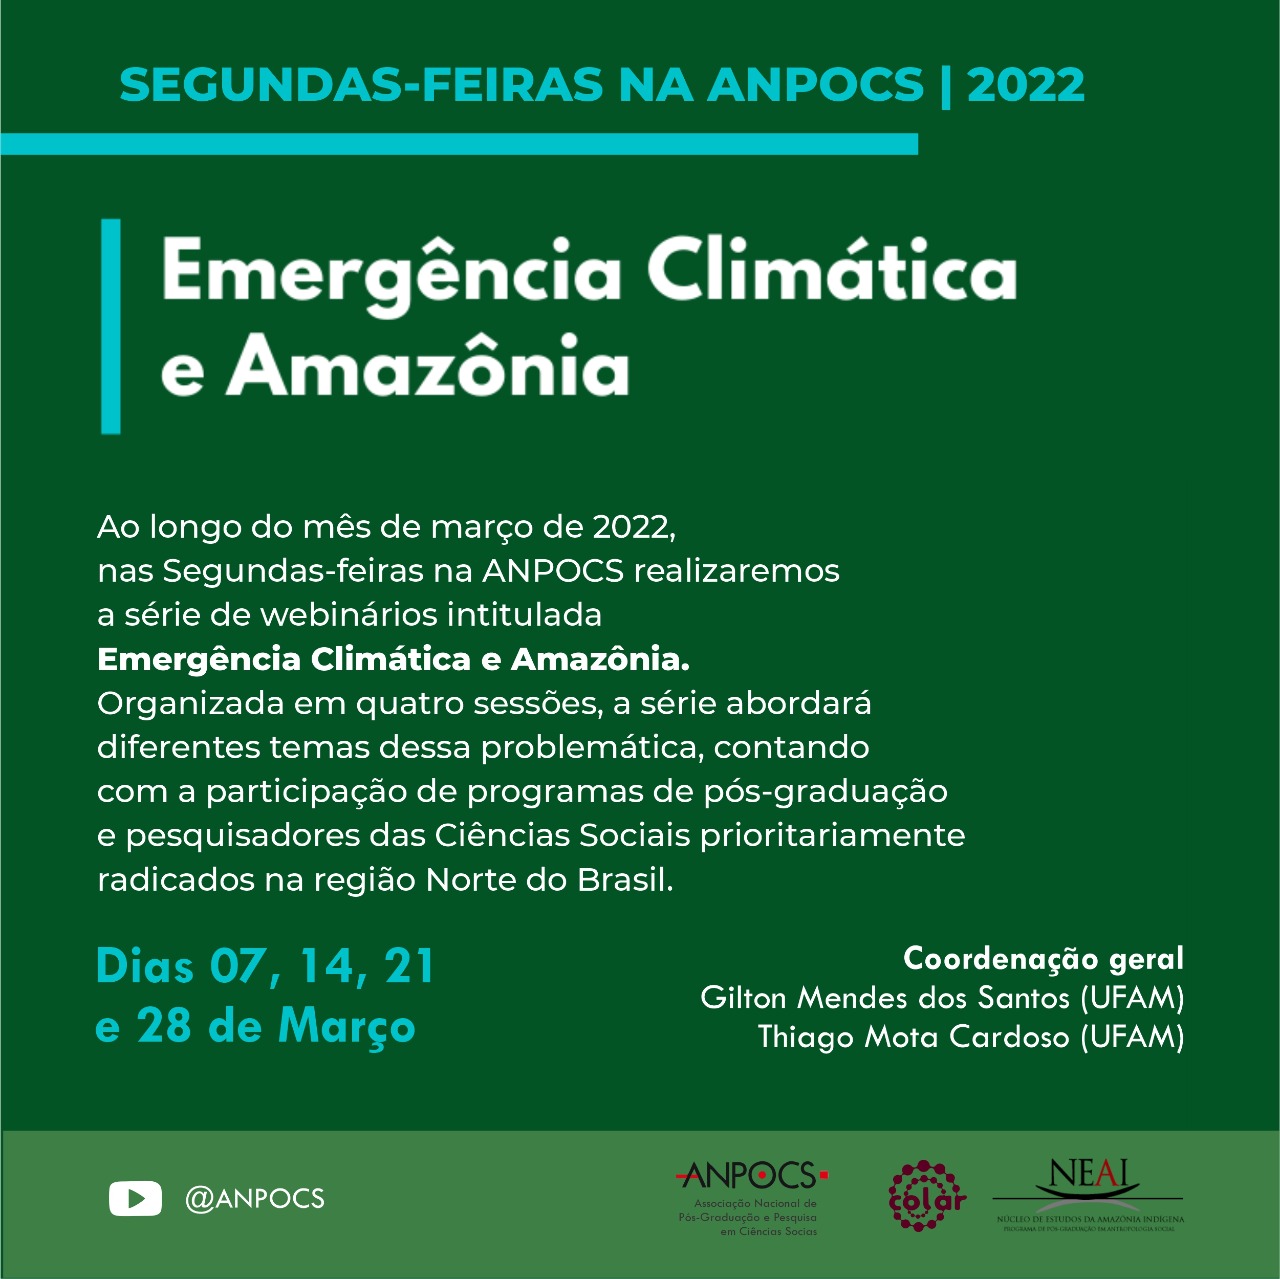 Climate emergency and the Amazon 